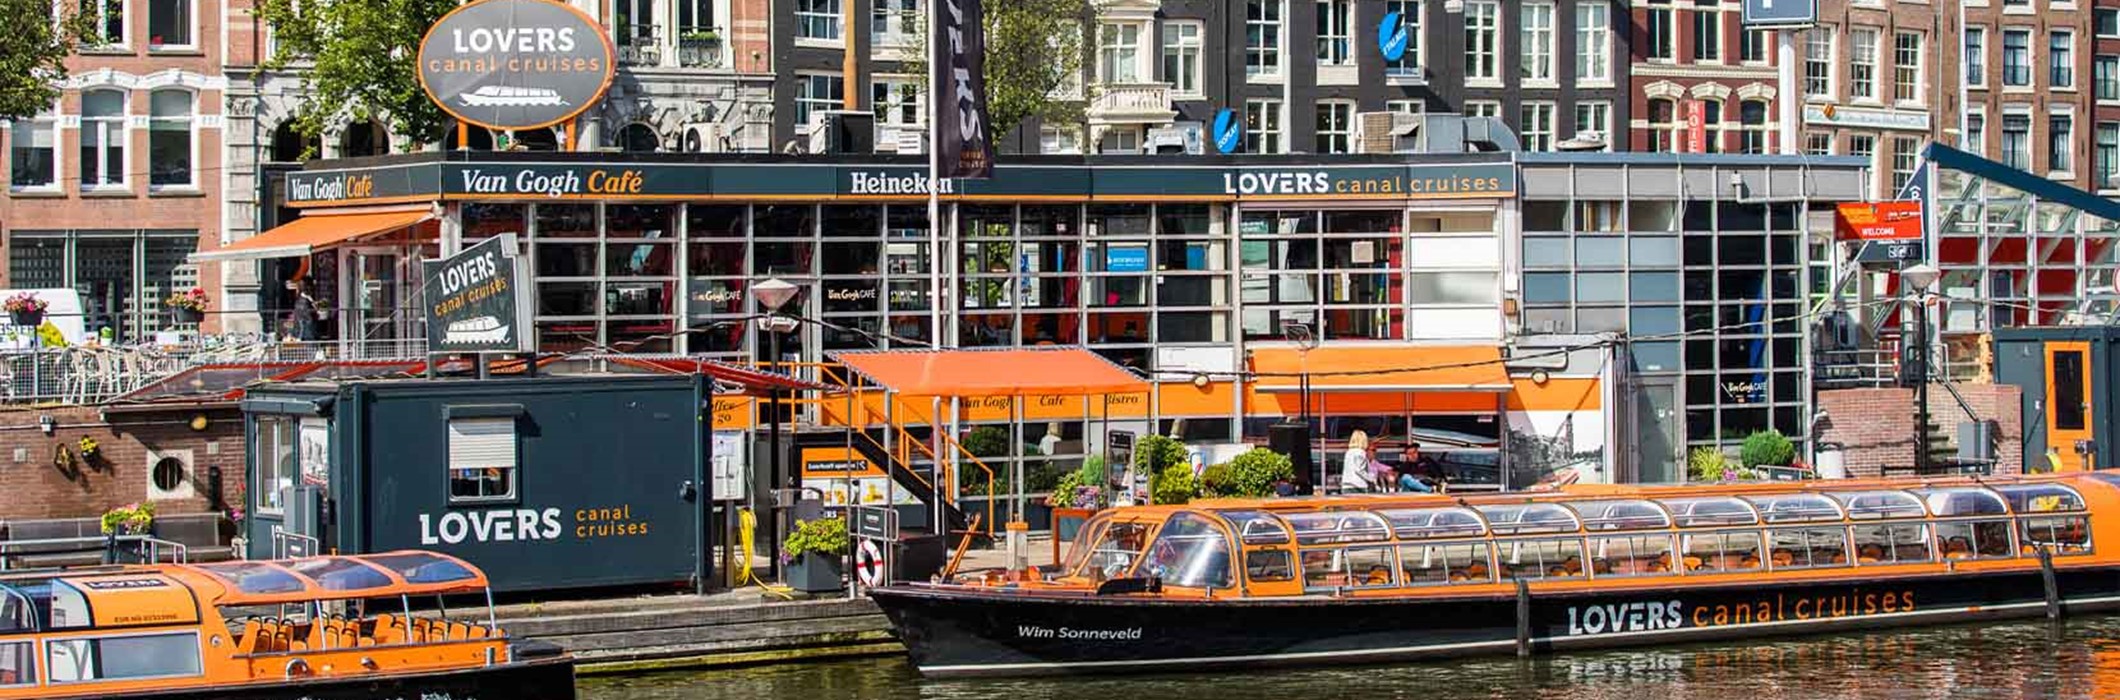 1 h. Amsterdam Day Canal Cruise